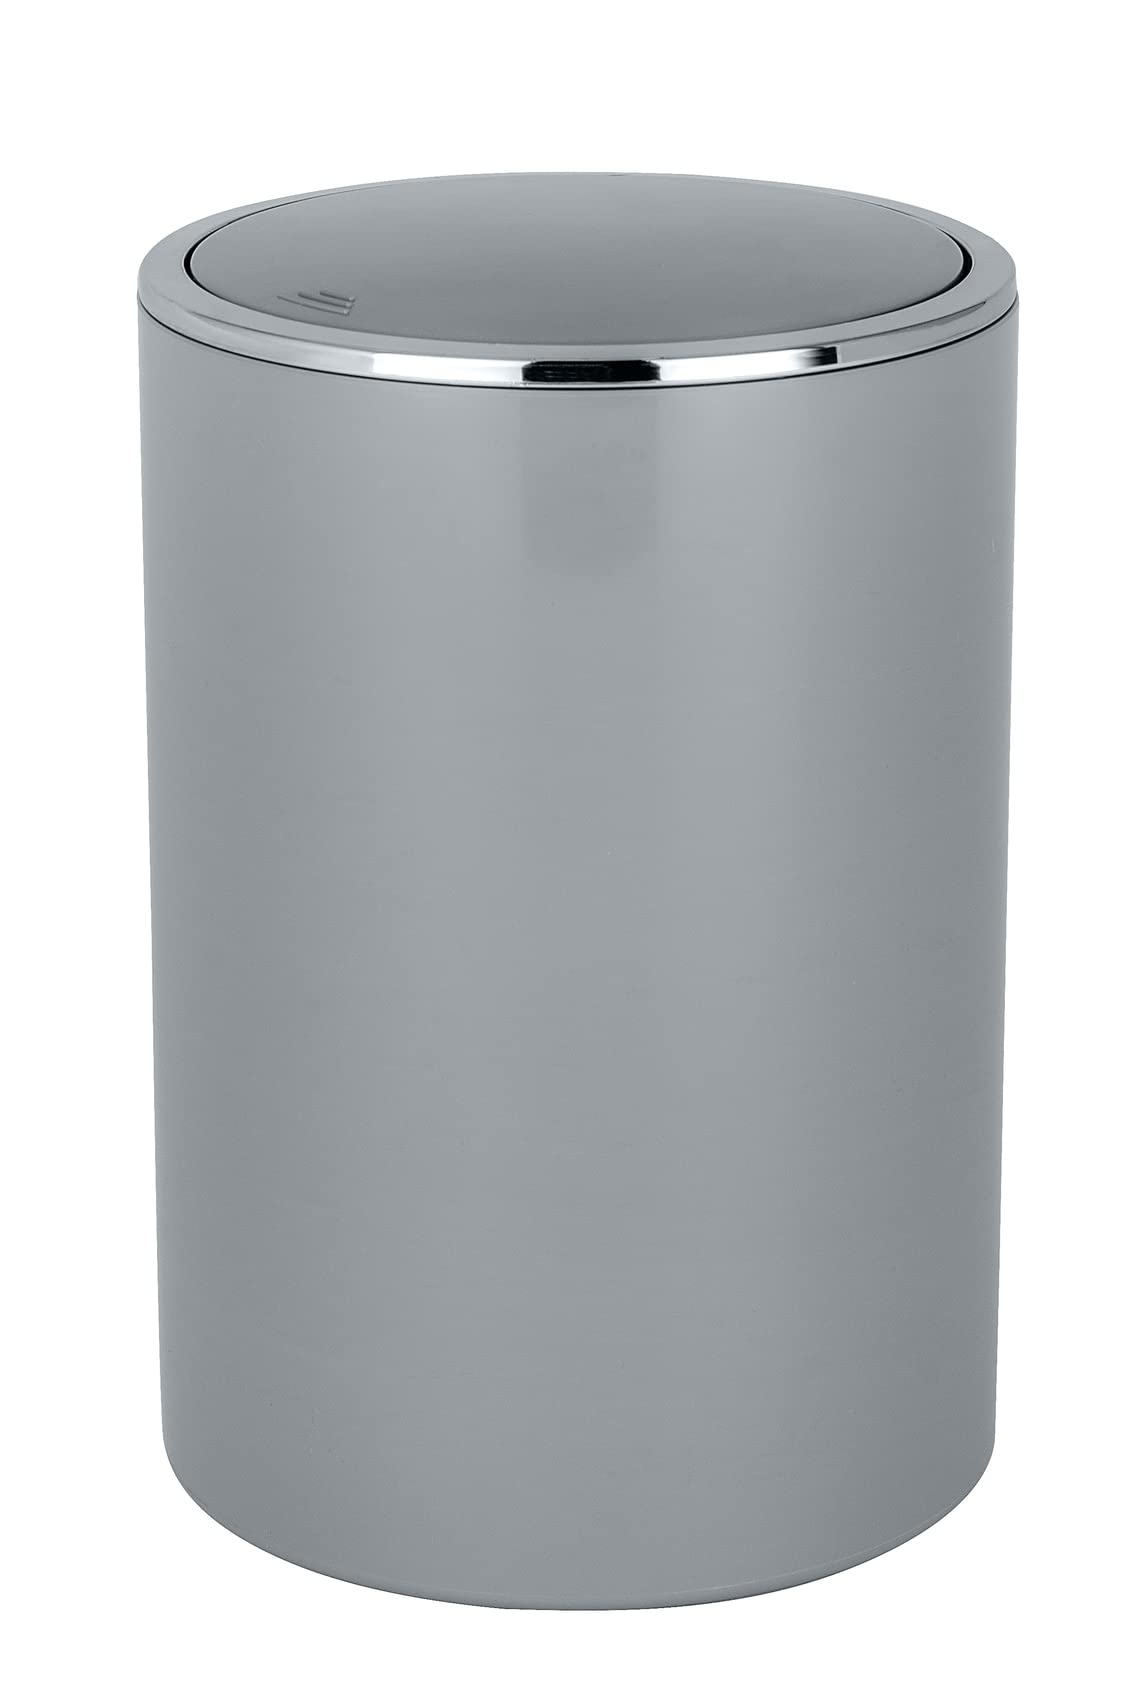 WENKO Inca Trash Can with Lid, Waste Bin with Swing Lid, Small Trash Can, Mini Trash Can, Small Garbage Can, Small Waste Basket, 1.3 Gal, Ø 7.28 x 10.04 in, Gray